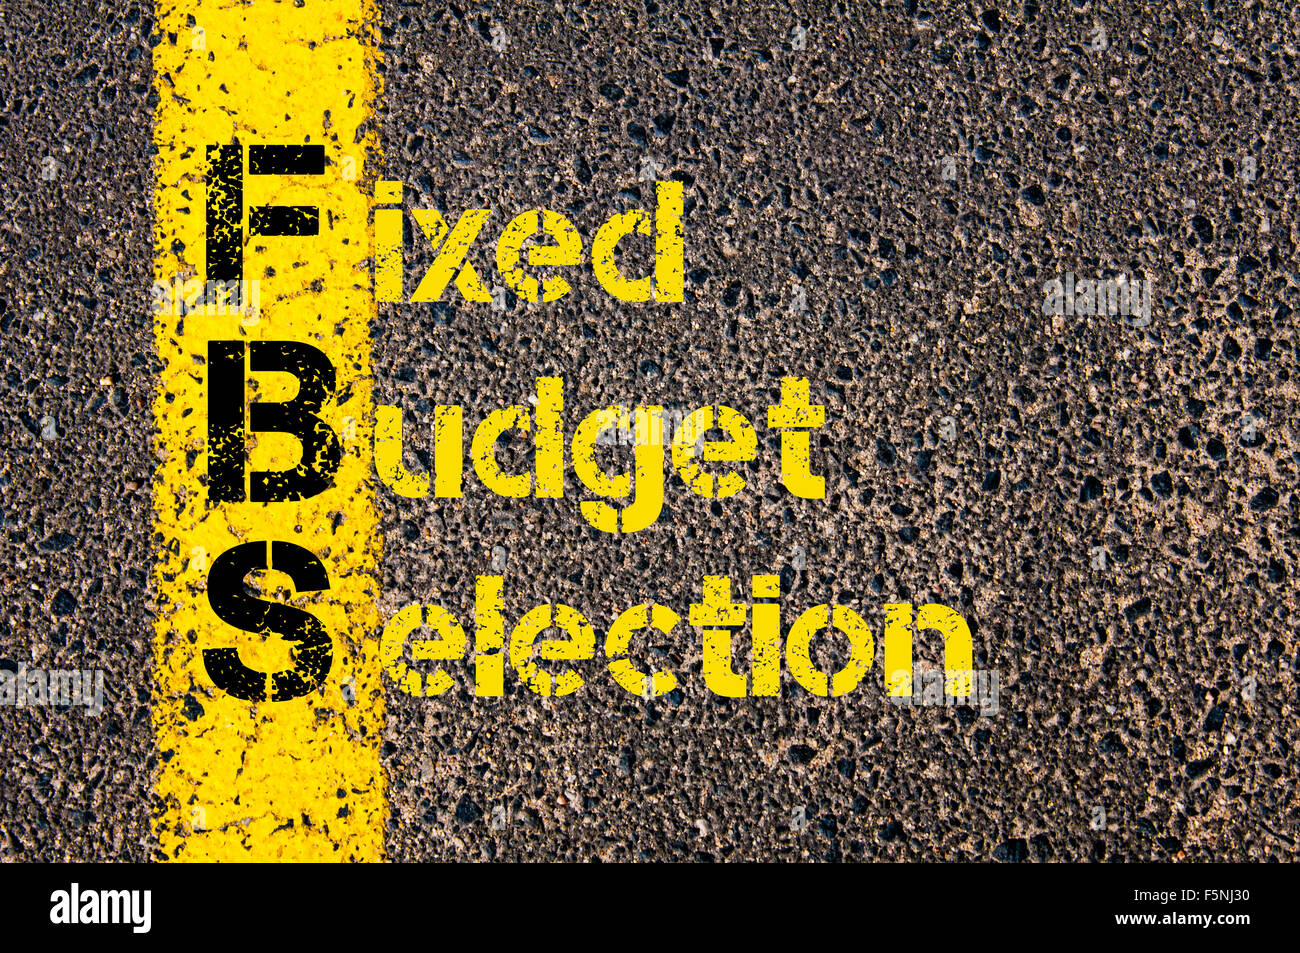 Concept image of Business Acronym FBS as Fixed Budget Selection written over road marking yellow paint line. Stock Photo